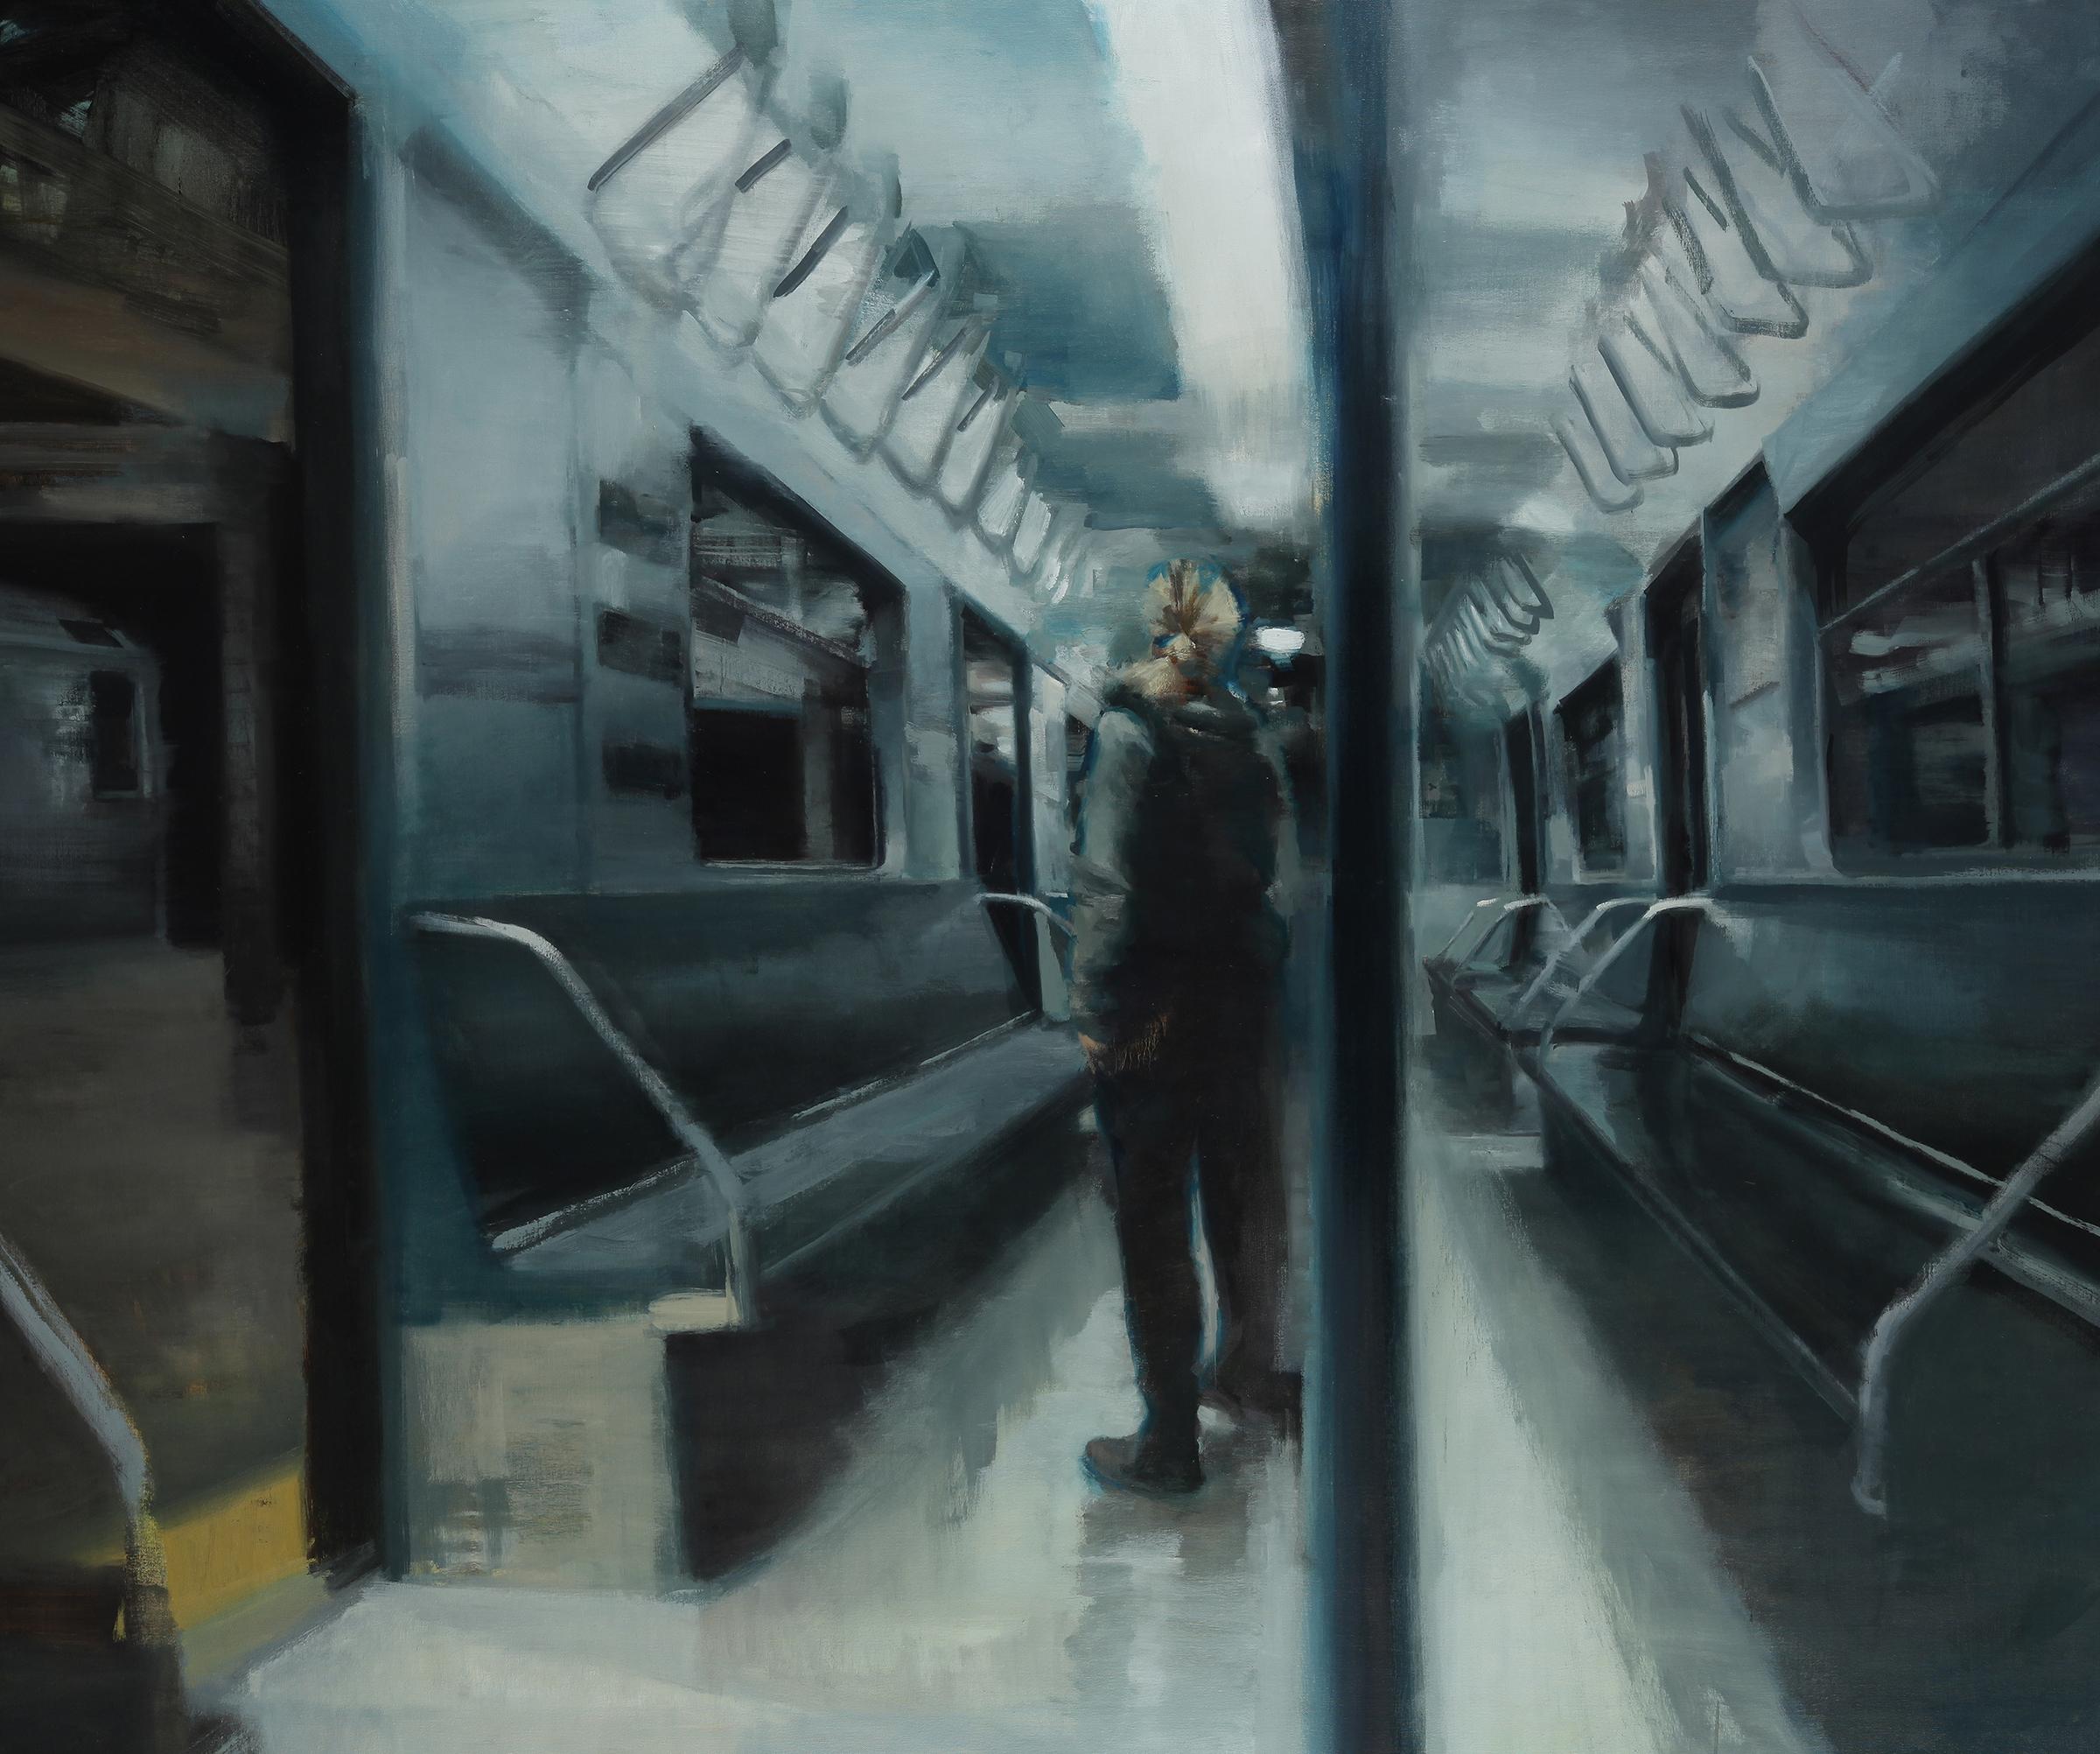 PASSENGER, person standing on subway, bright lights, grey, white, realism - Painting by Kim Cogan